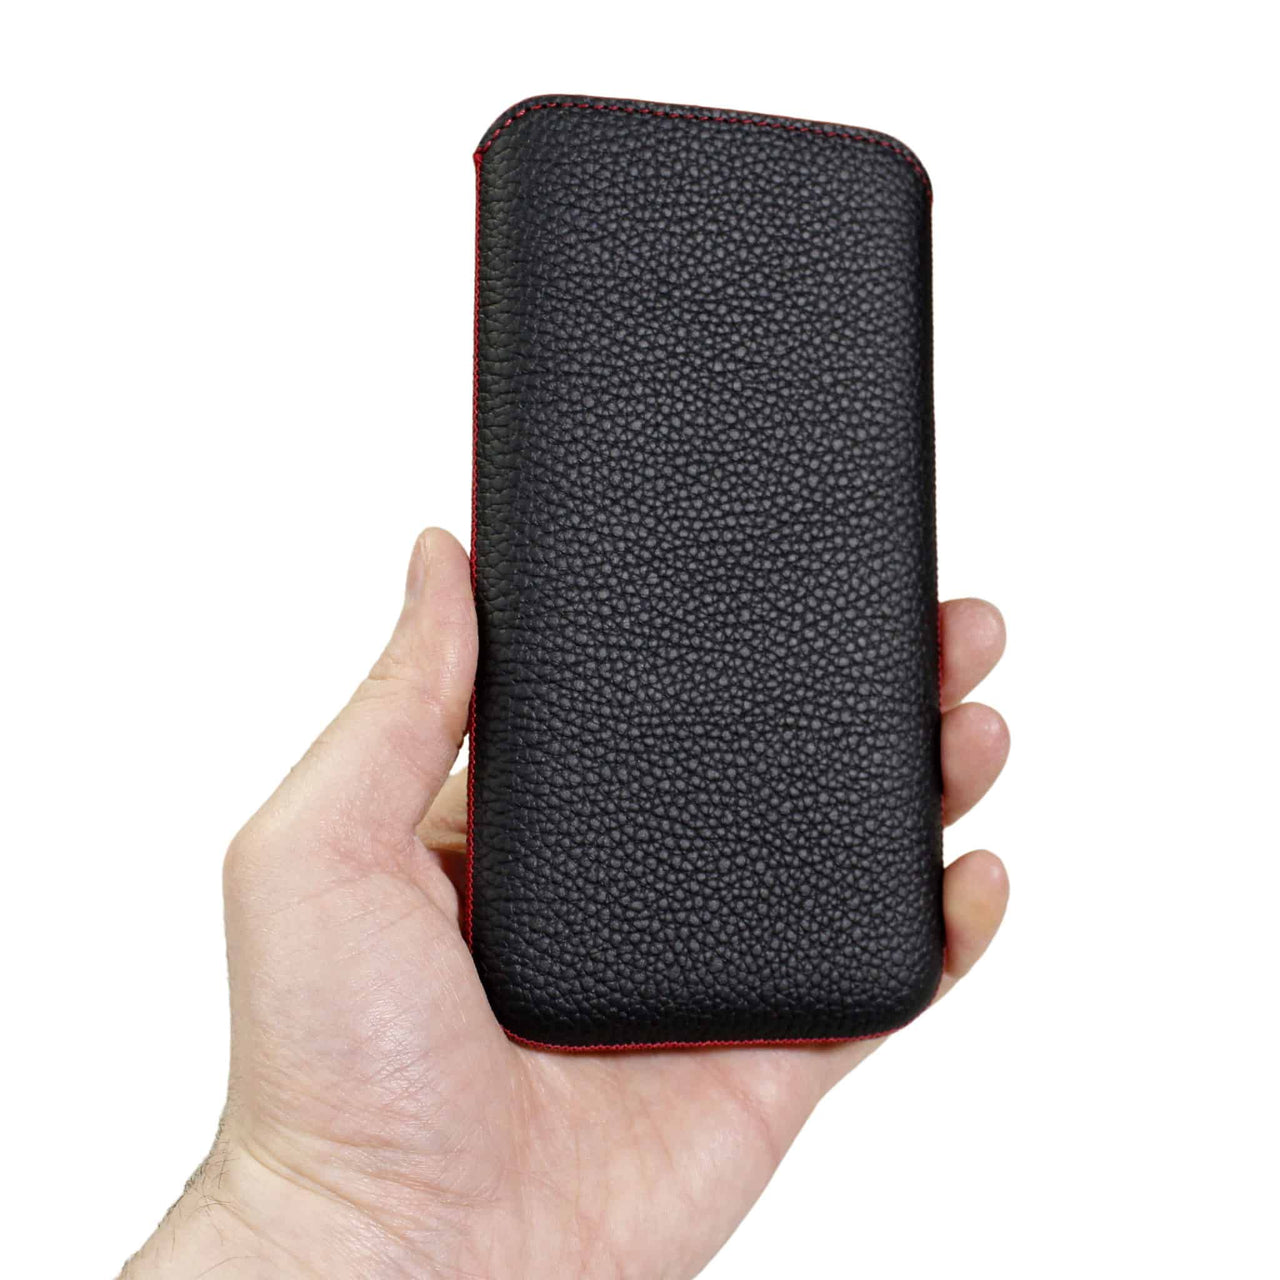 iPhone XS Max Genuine Leather Pouch Sleeve Case | Artisanpouch